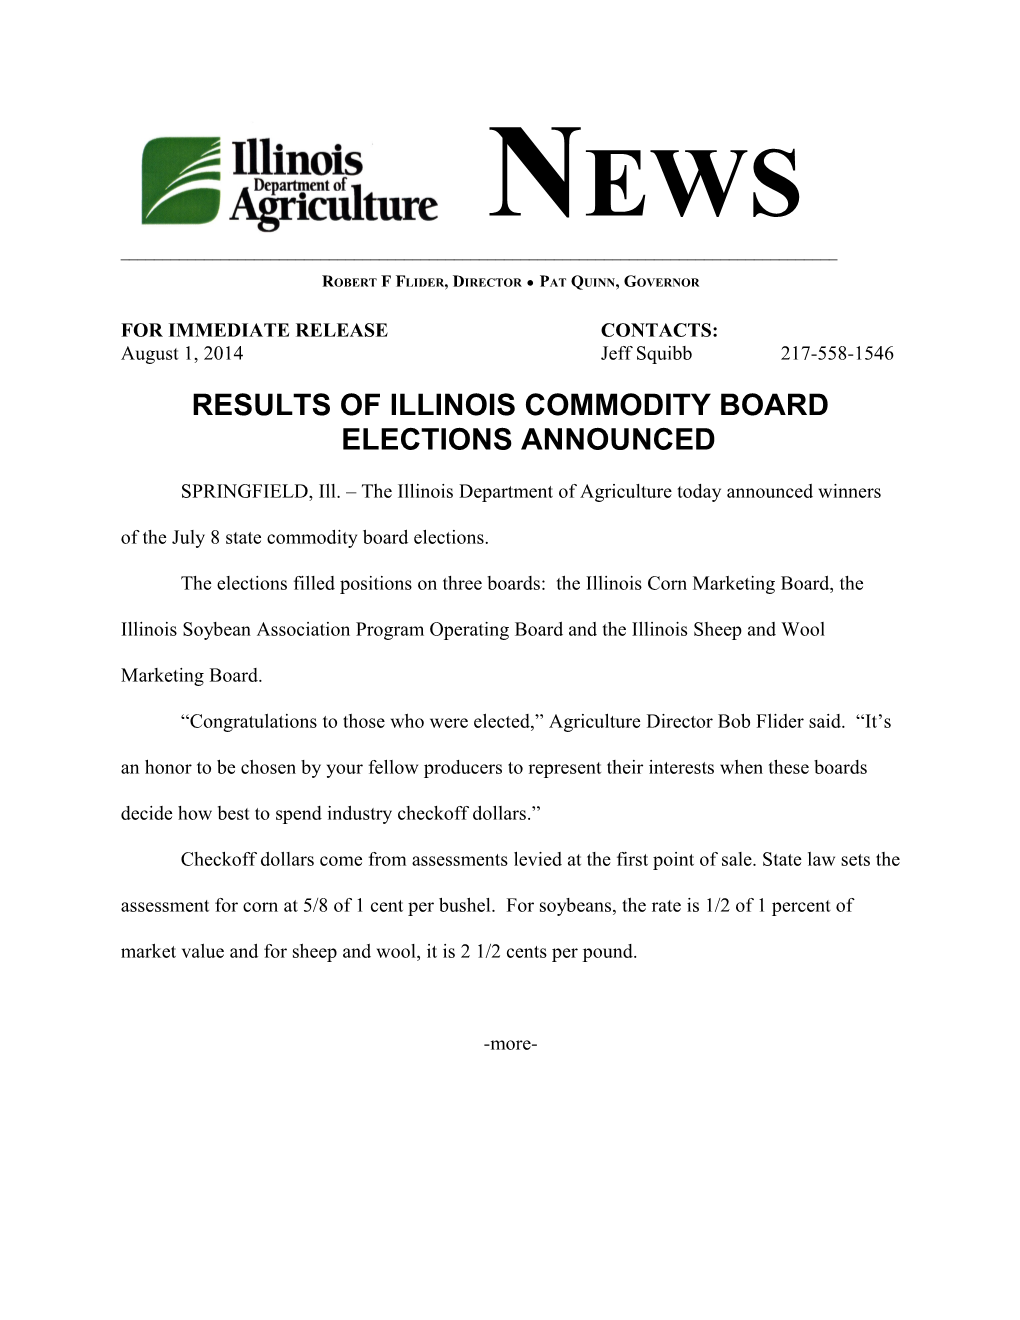 Results of Illinois Commodity Board Elections Announced